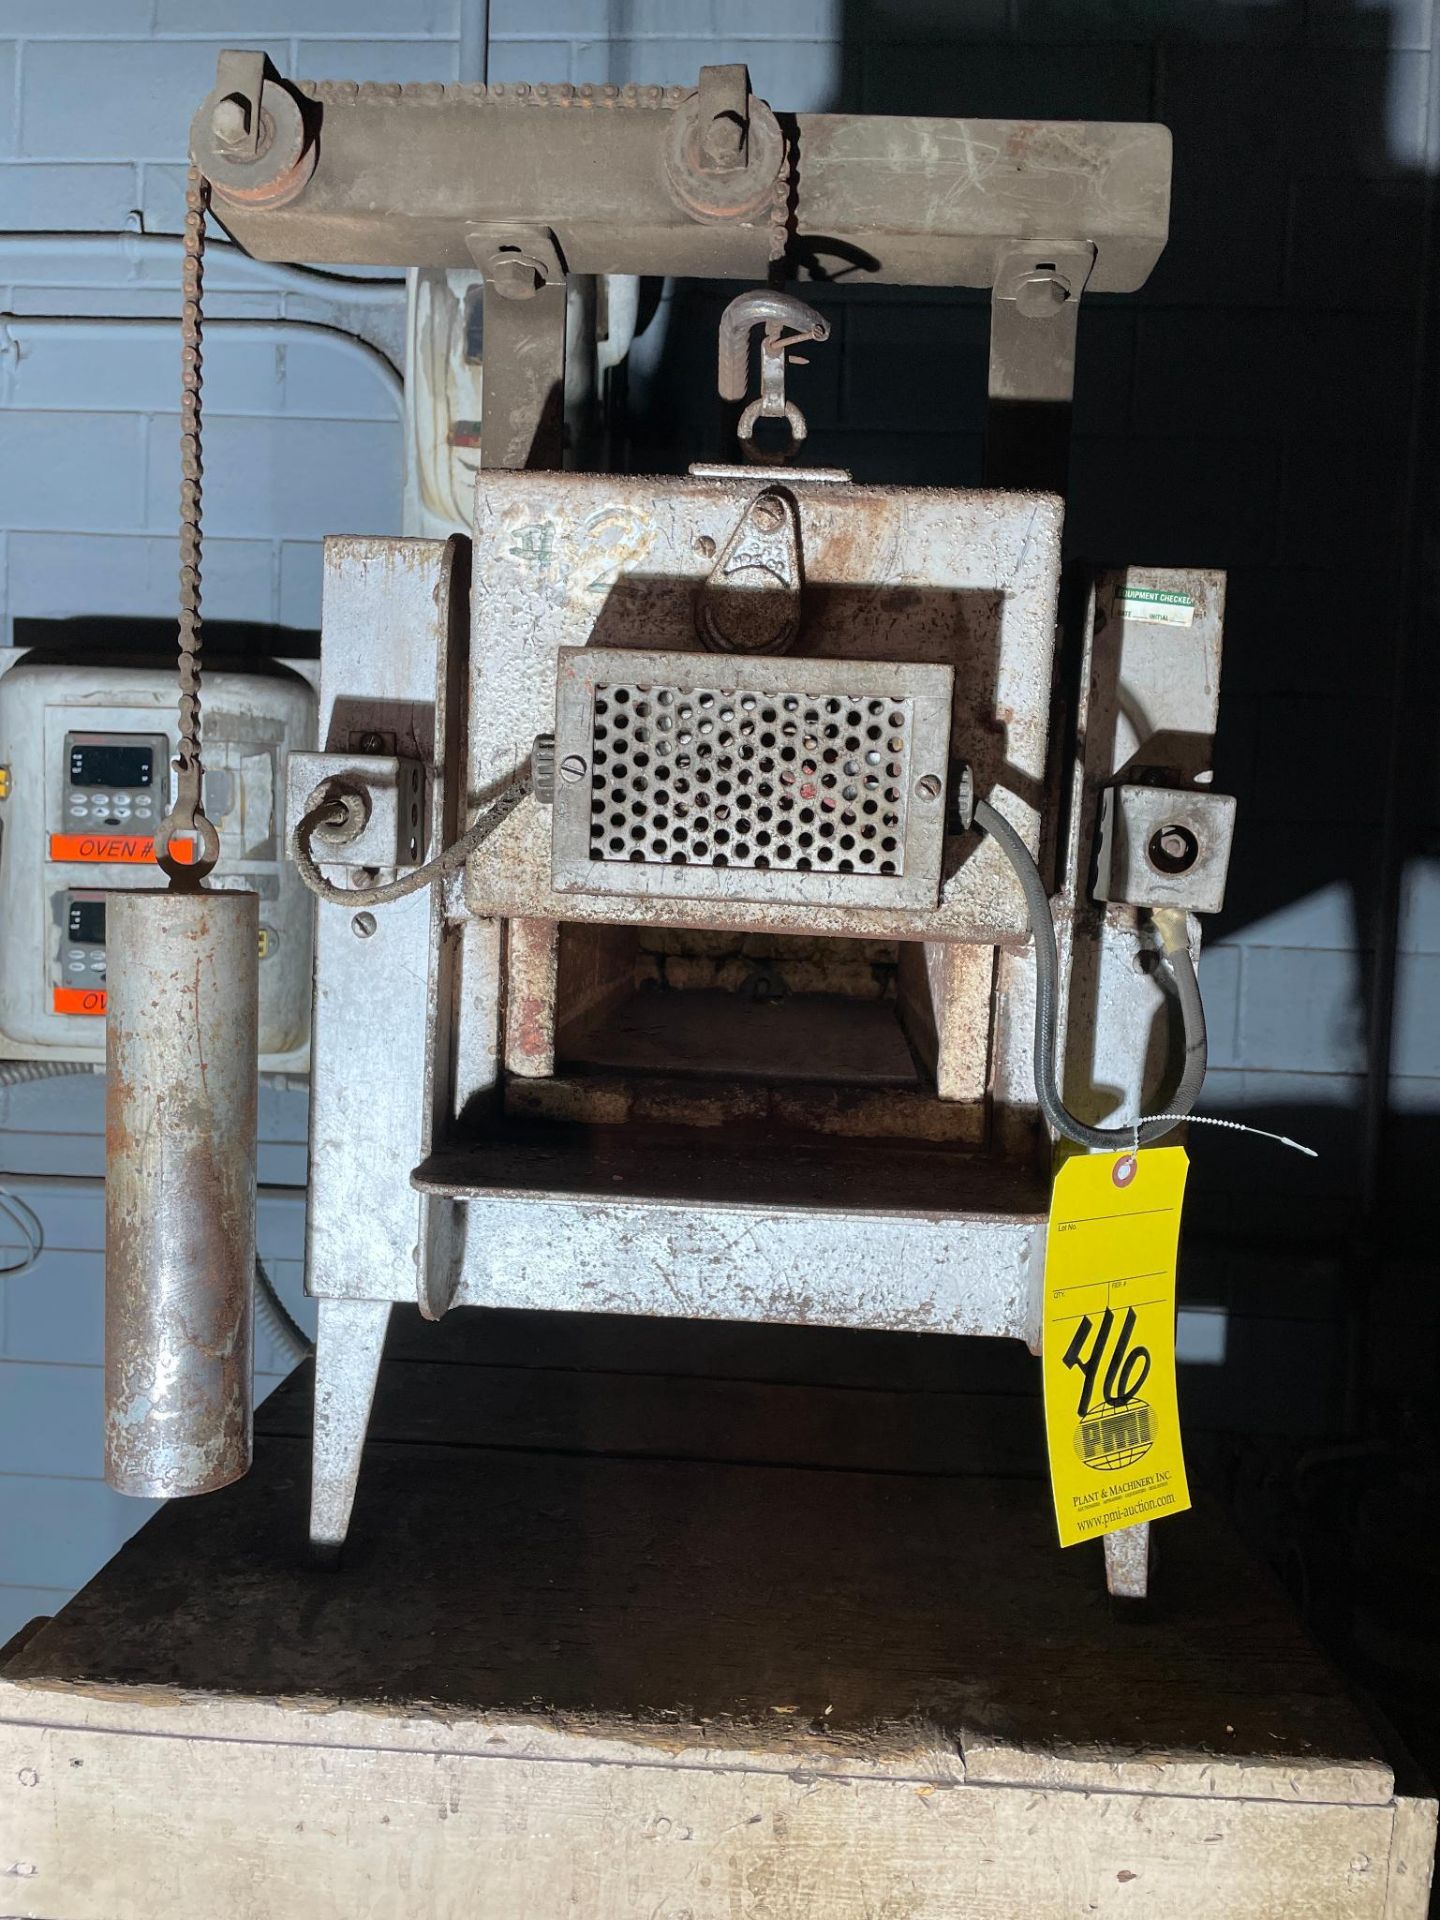 ELECTRIC FURNACE, HEAVY DUTY, 1850 deg., 230 V., w/ Thermaline oven, S/N 54321 - Image 2 of 3